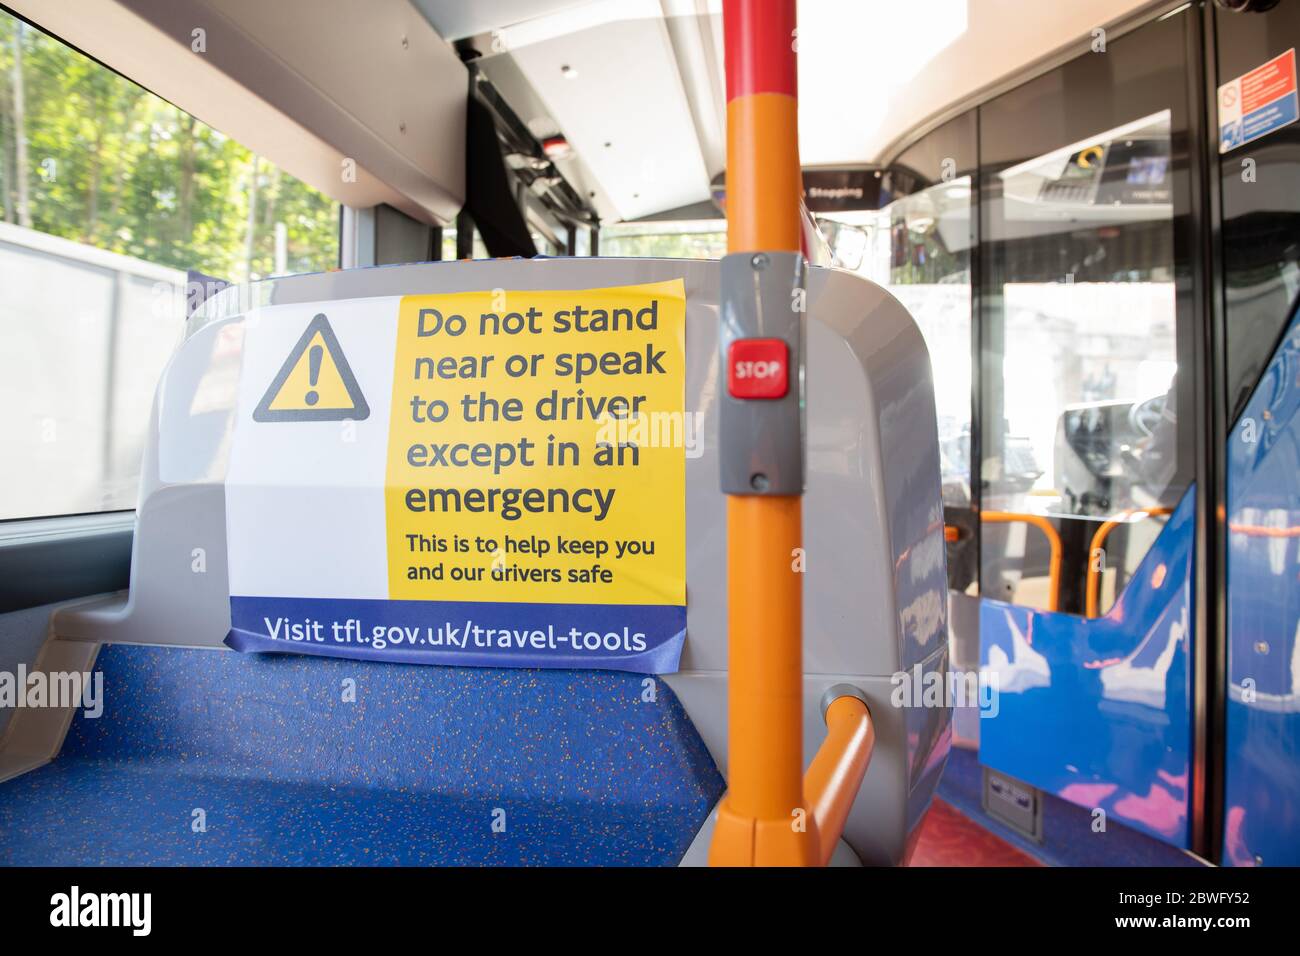 New stickers on buses remind commuters to socially distance during the COVID-19 pandemic.  Bus route  53. May 30, 2020. Stock Photo